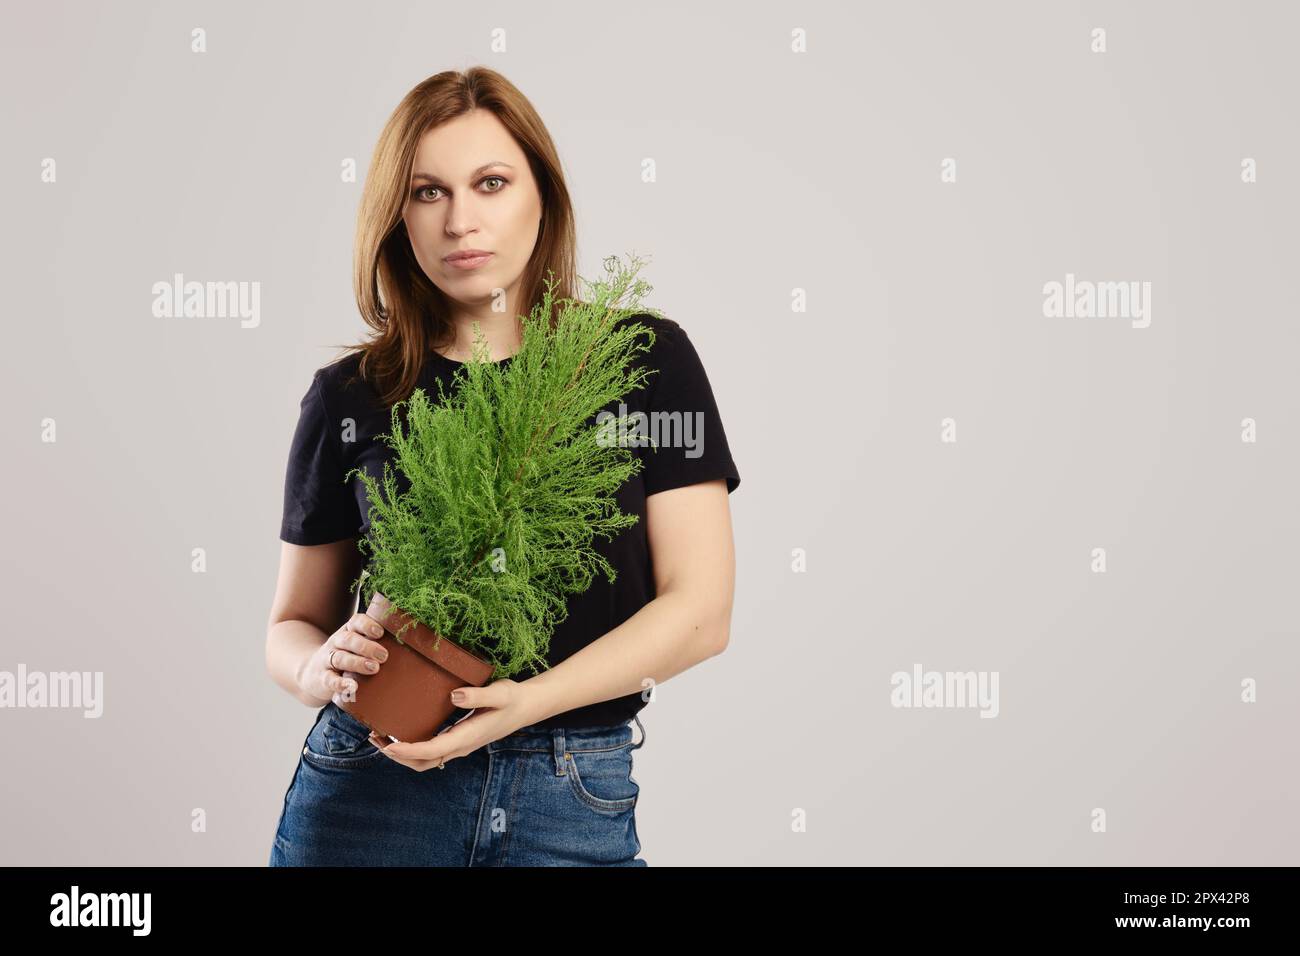 Botanist holds small decorative thuja in hand over grey background Stock Photo